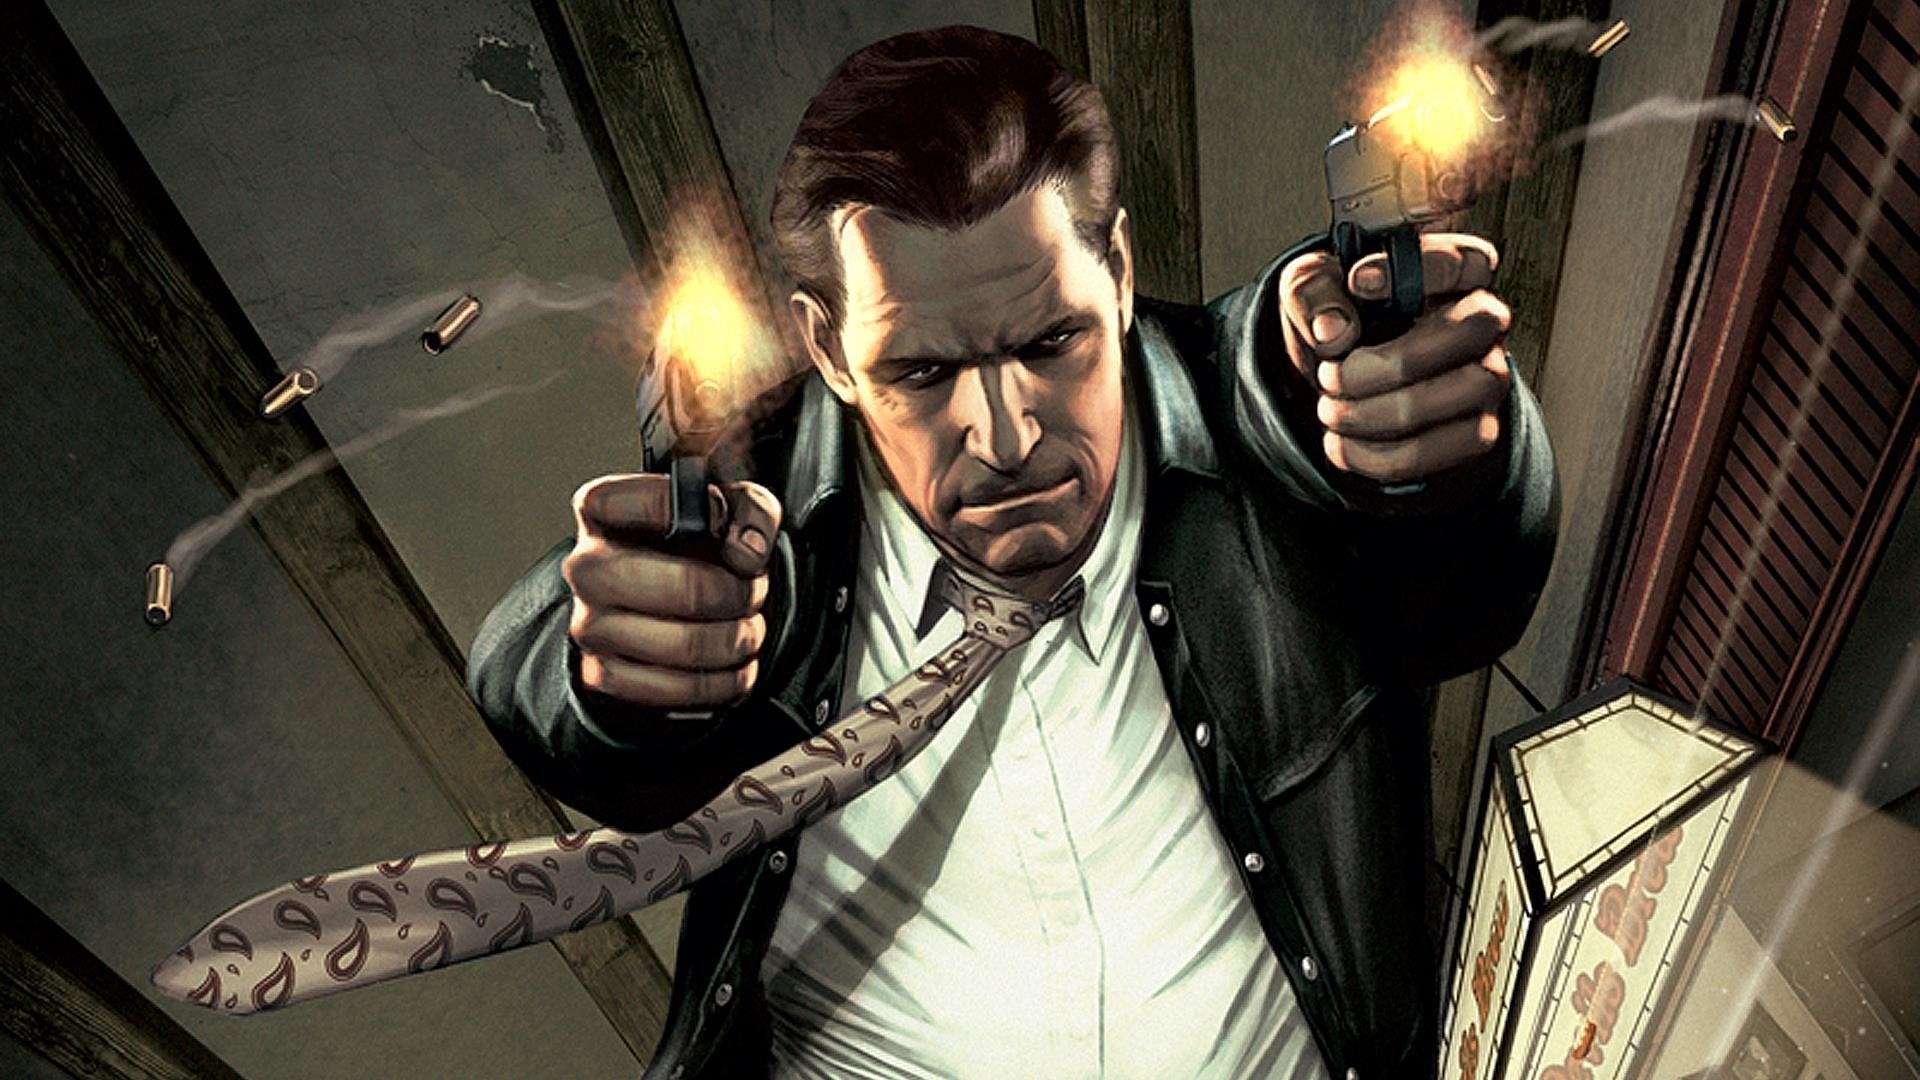 Remedy provides updates on Control 2 and Max Payne remake